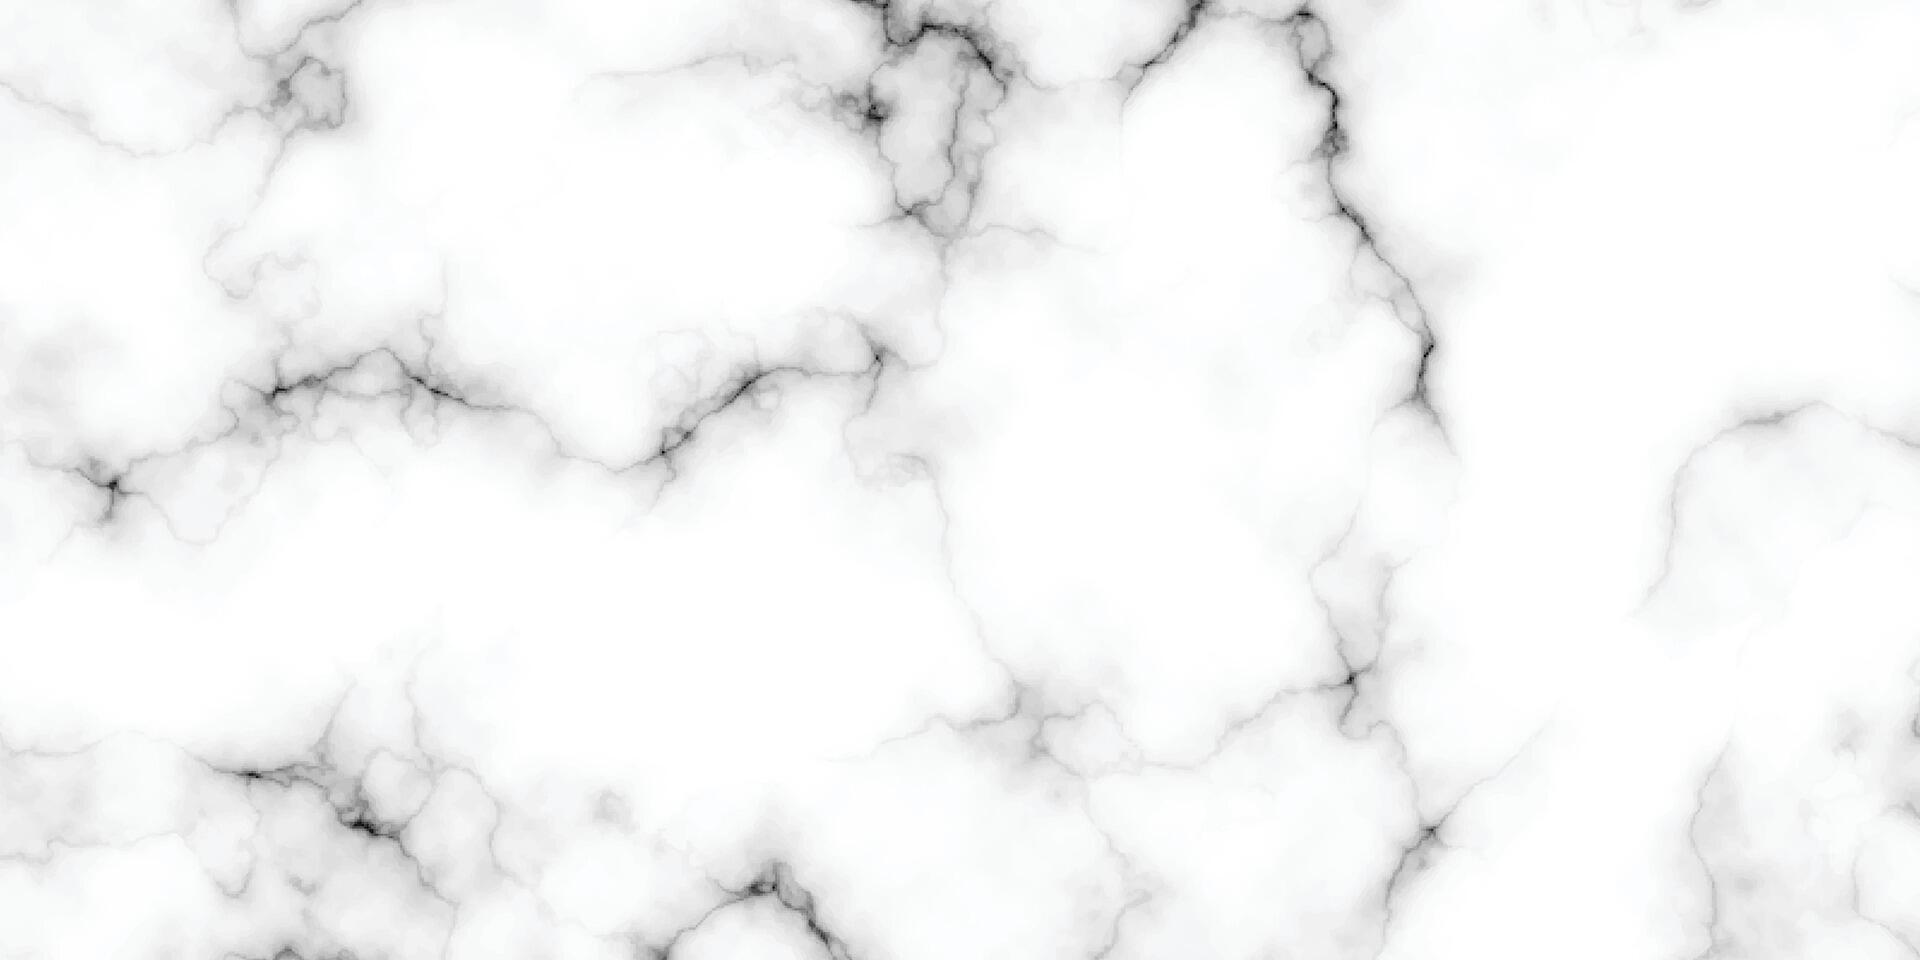 Natural white marble stone texture. Stone ceramic art wall interiors backdrop design. Seamless pattern of tile stone with bright and luxury. White Carrara marble stone texture. vector